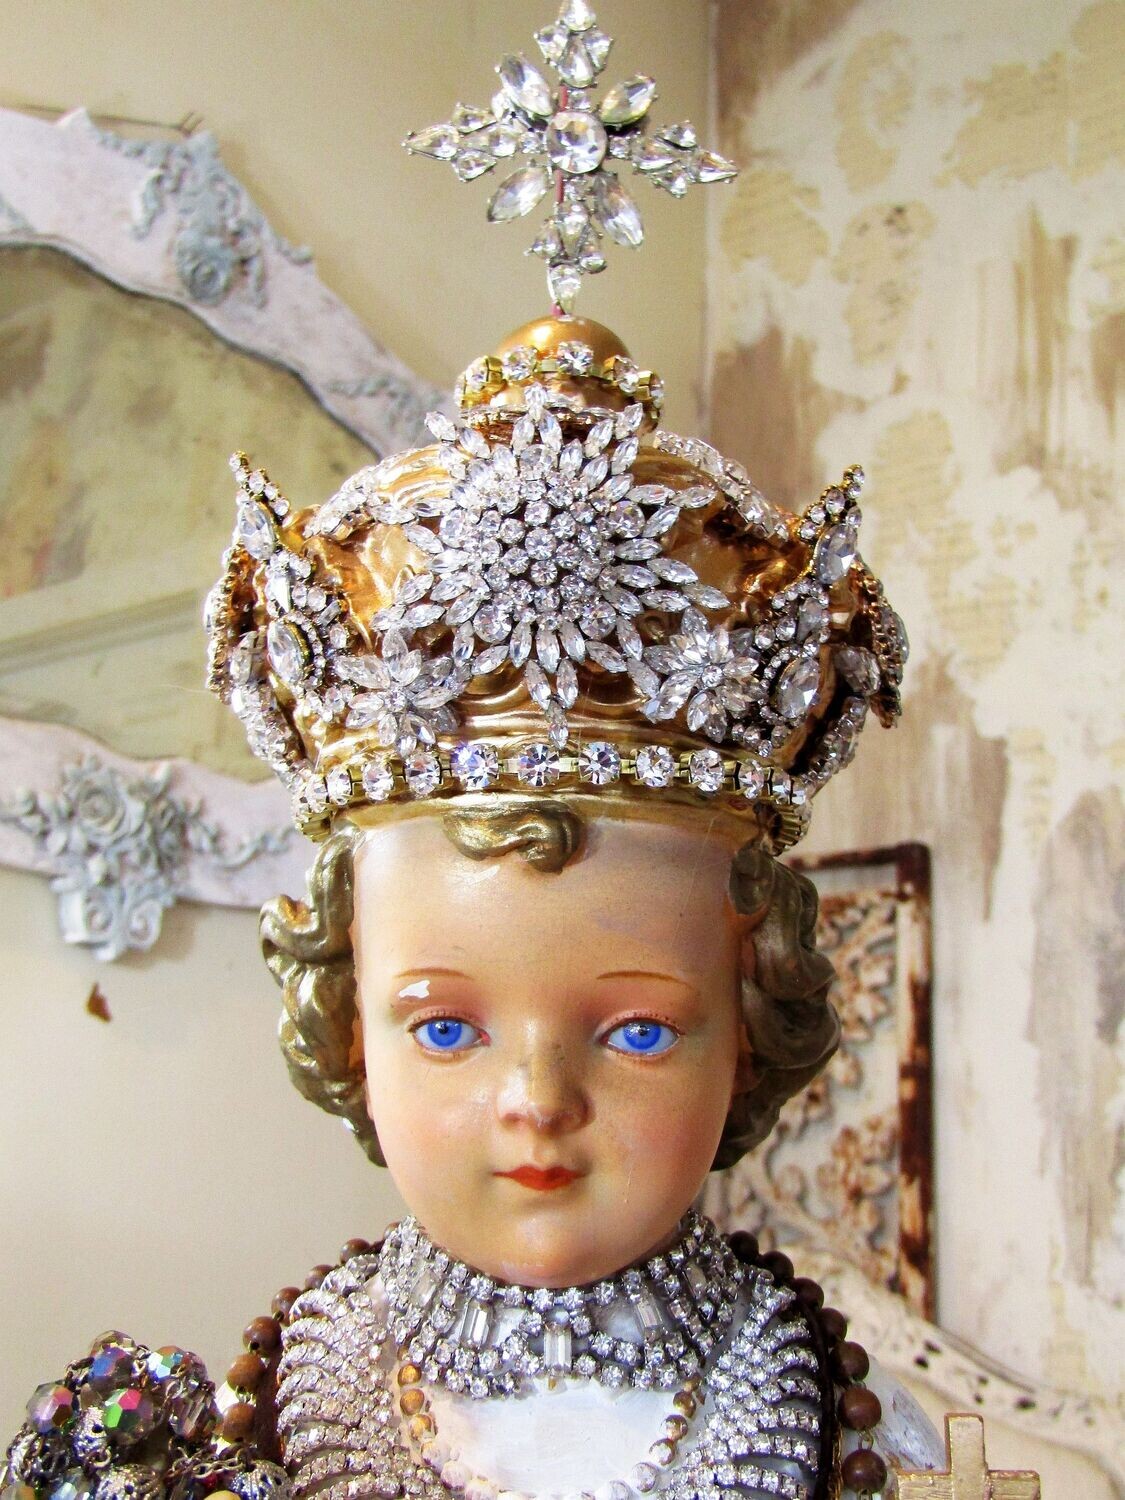 SOLD Large Infant of Prague statue with ornate rhinestone crown, piercing blue glass eyes